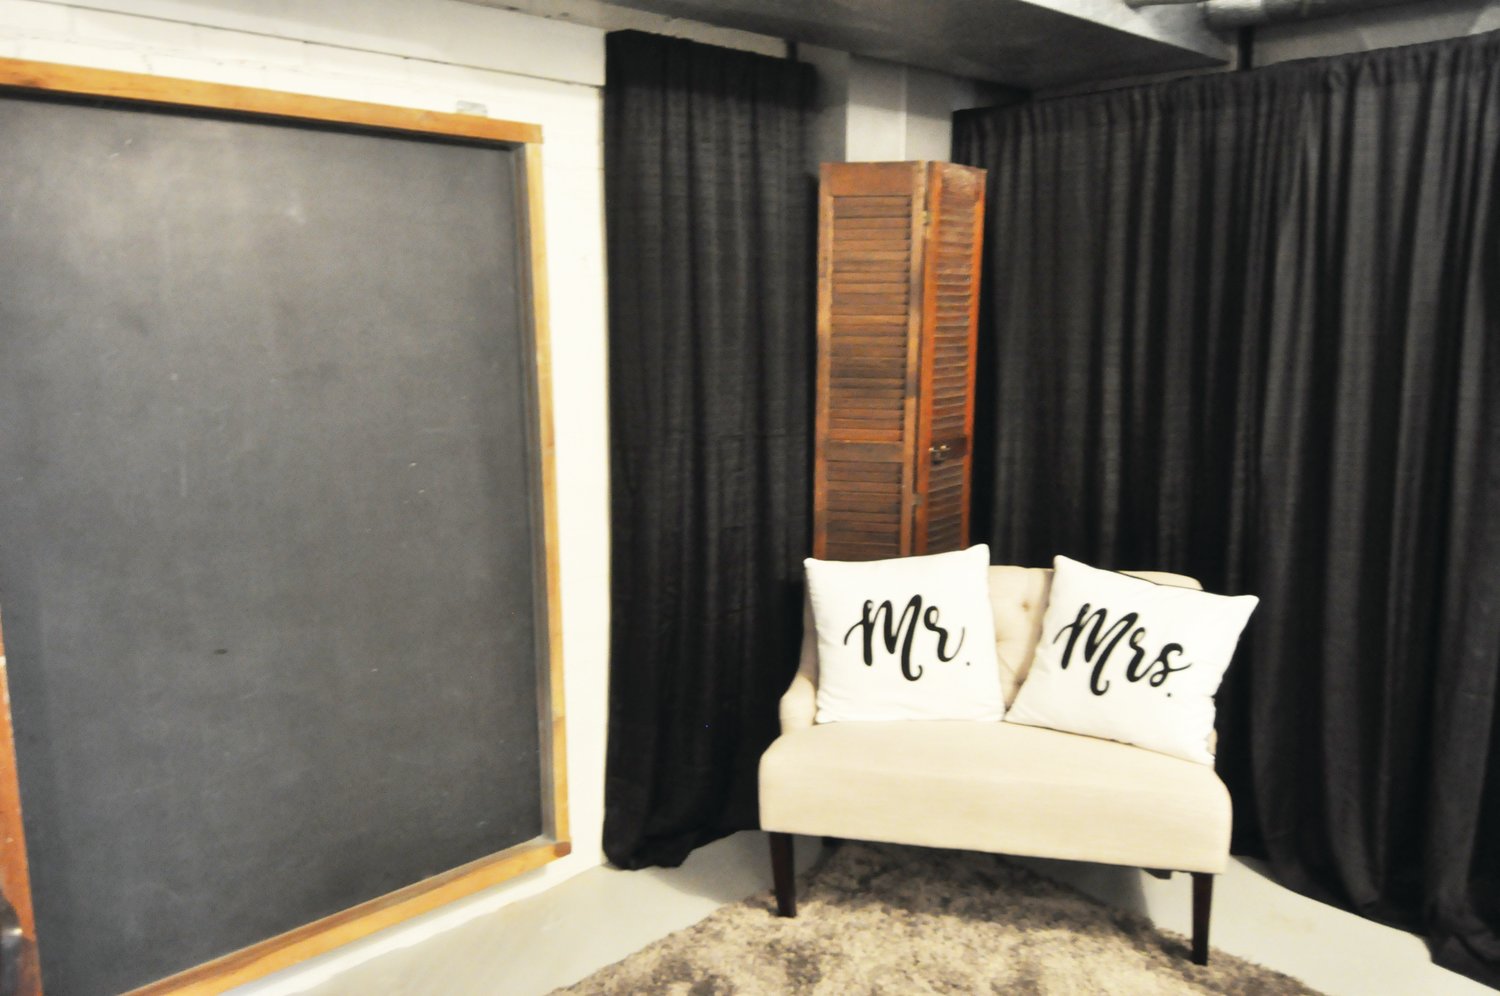 A dressing area at the Historic Lutheran Church Event Center features a chalkboard found in the church, which closed in 2018.